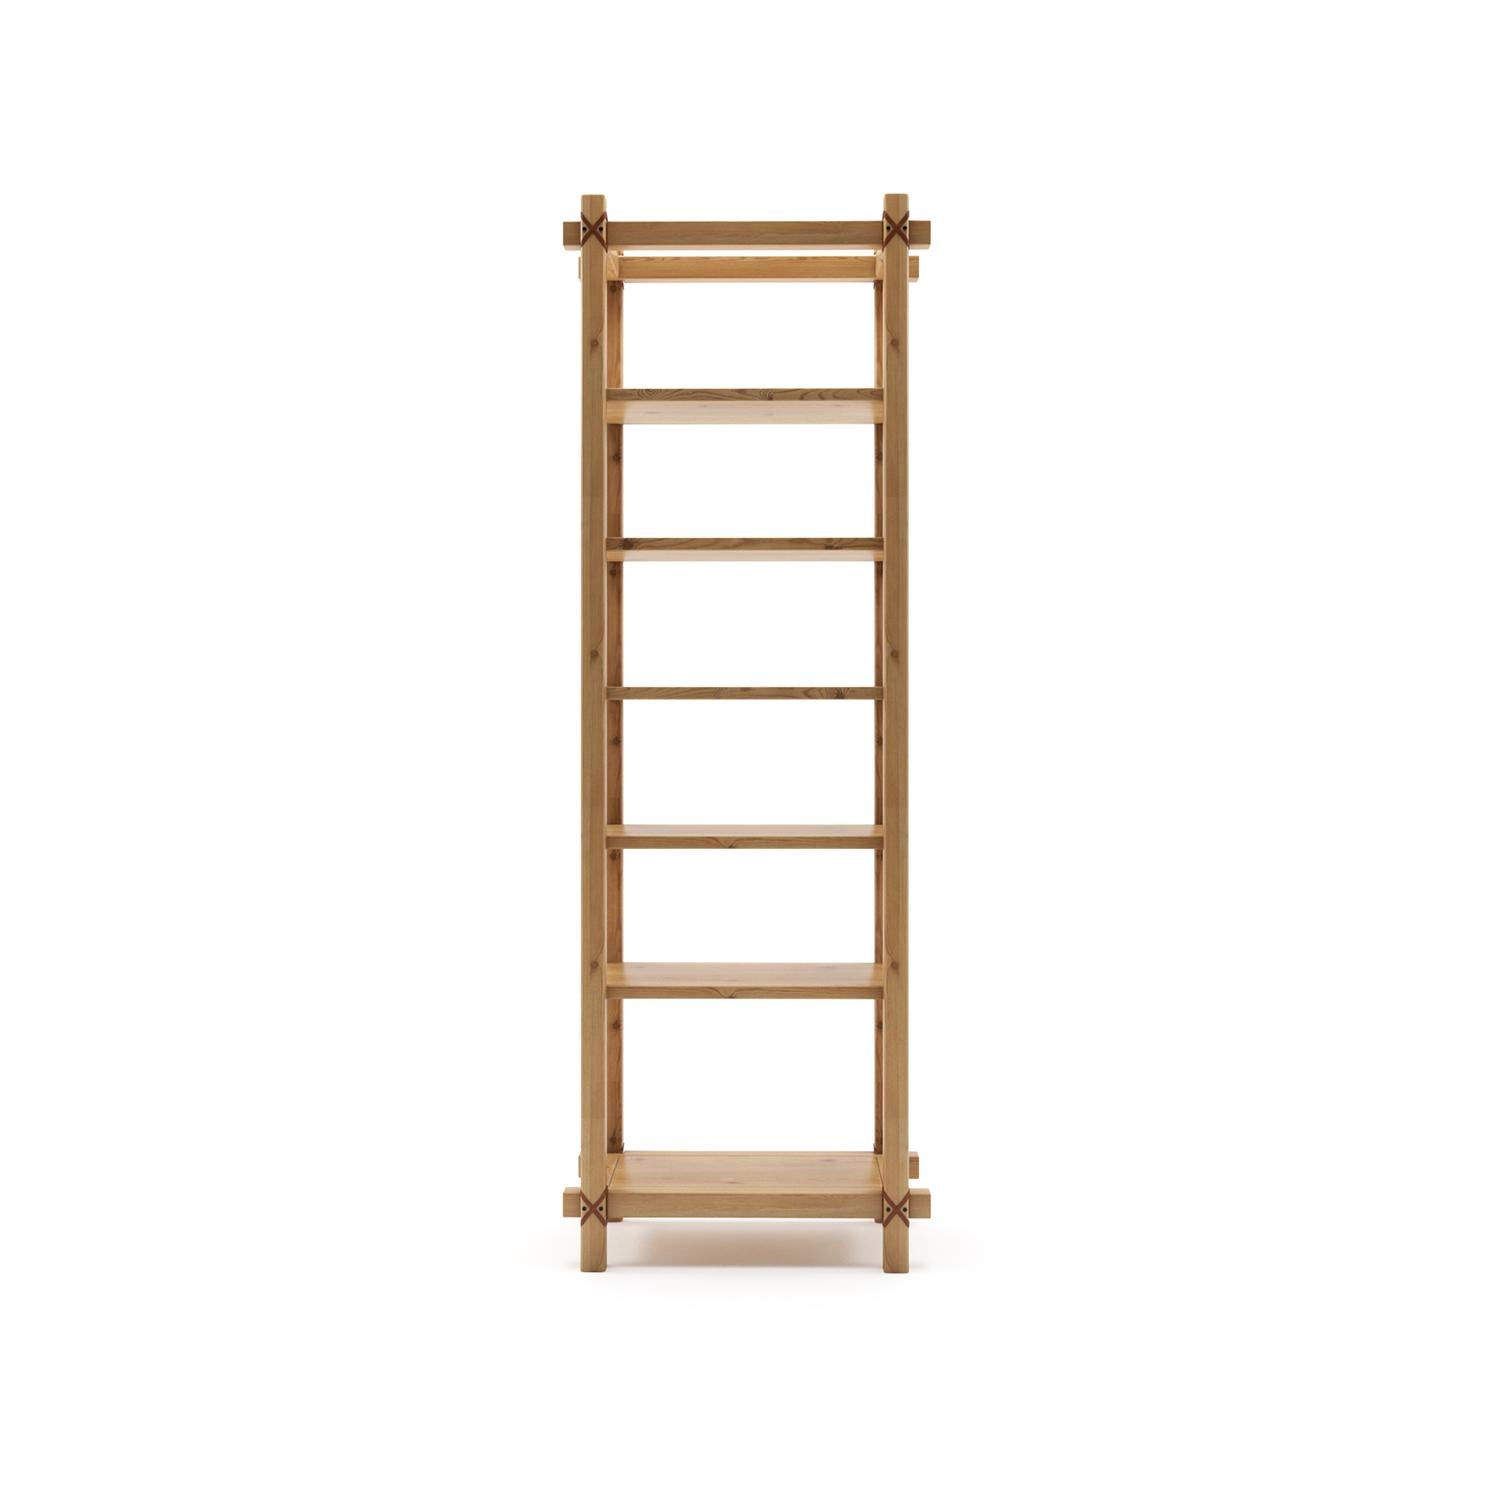 Introducing the Frenzo Rack - crafted from massive oak, this statement piece brings a touch of beauty to any room. Its bold yet timeless design ensures it will be the focal point for years to come. Are you ready to elevate your living space? Get the